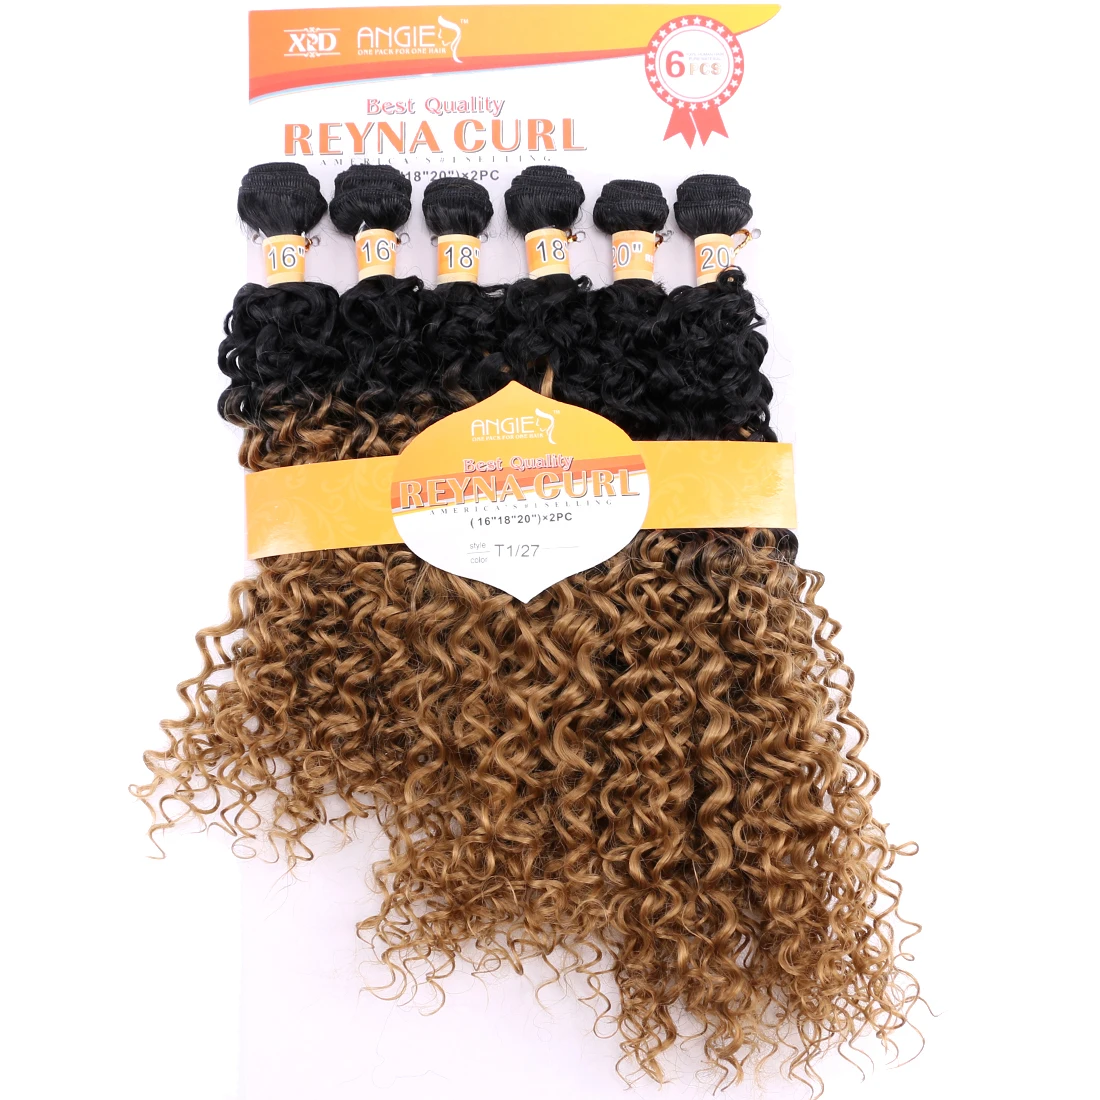 6pcs/set Kinky curly Black to golden Two tone ombre High Temperature Synthetic weaving hair bundles for Black Women